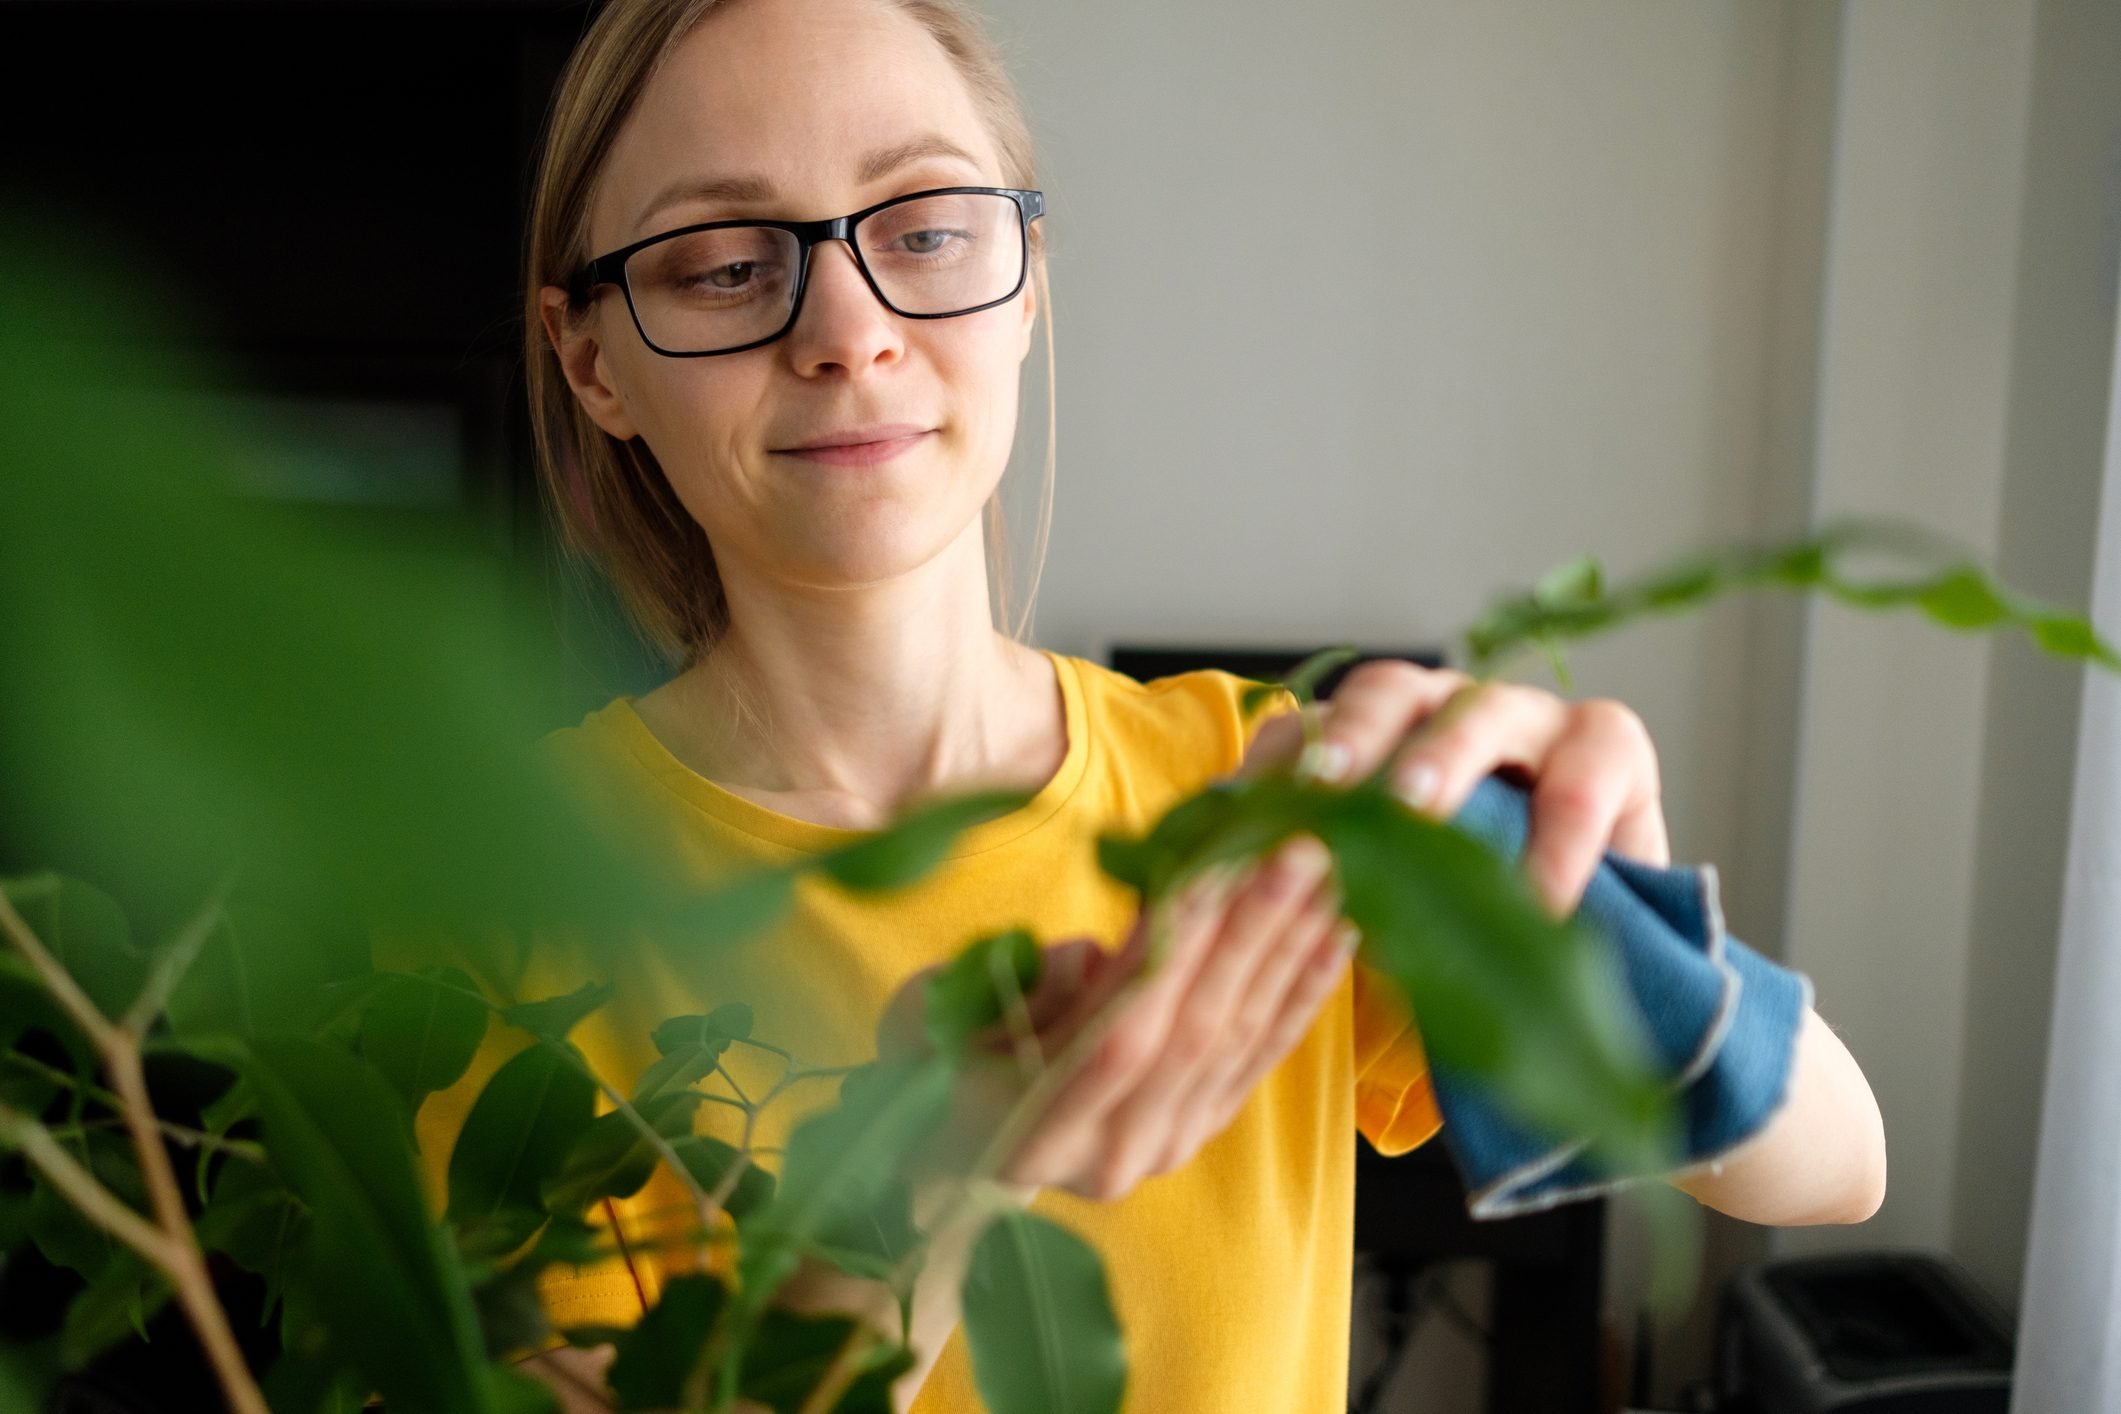 A woman with glasses or a Girl with a Damp Cloth in Her Hands Wipes and Cleans a Houseplant from dust, at home. The Gardener or Housekeeper Takes care of the Ficus Leaves. The concept of caring for flowers, cleaning the space in the house, real life.